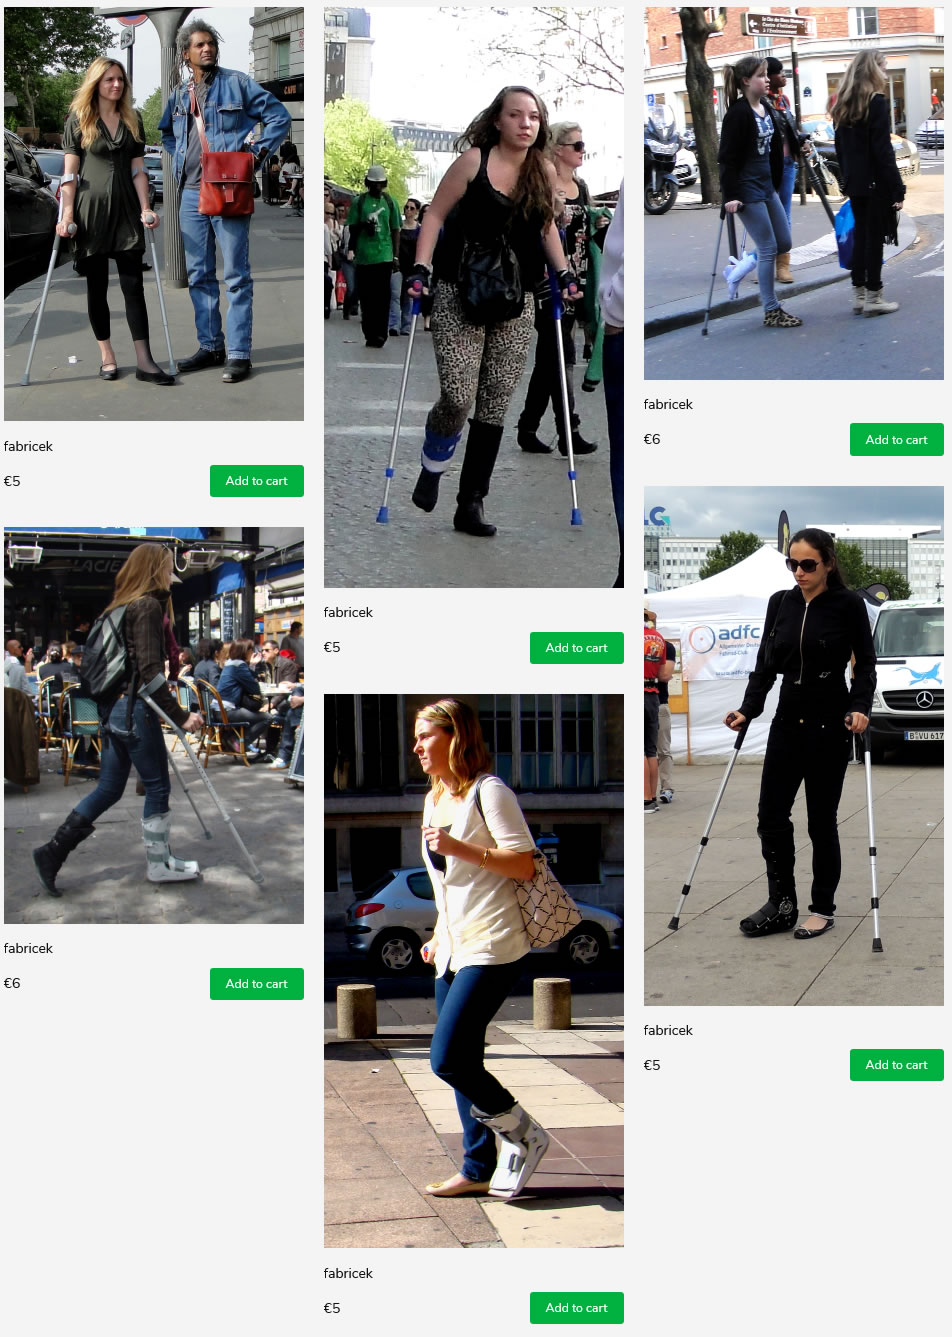 6 sets of french ladies with injured feet in braces and camwalkers on crutches